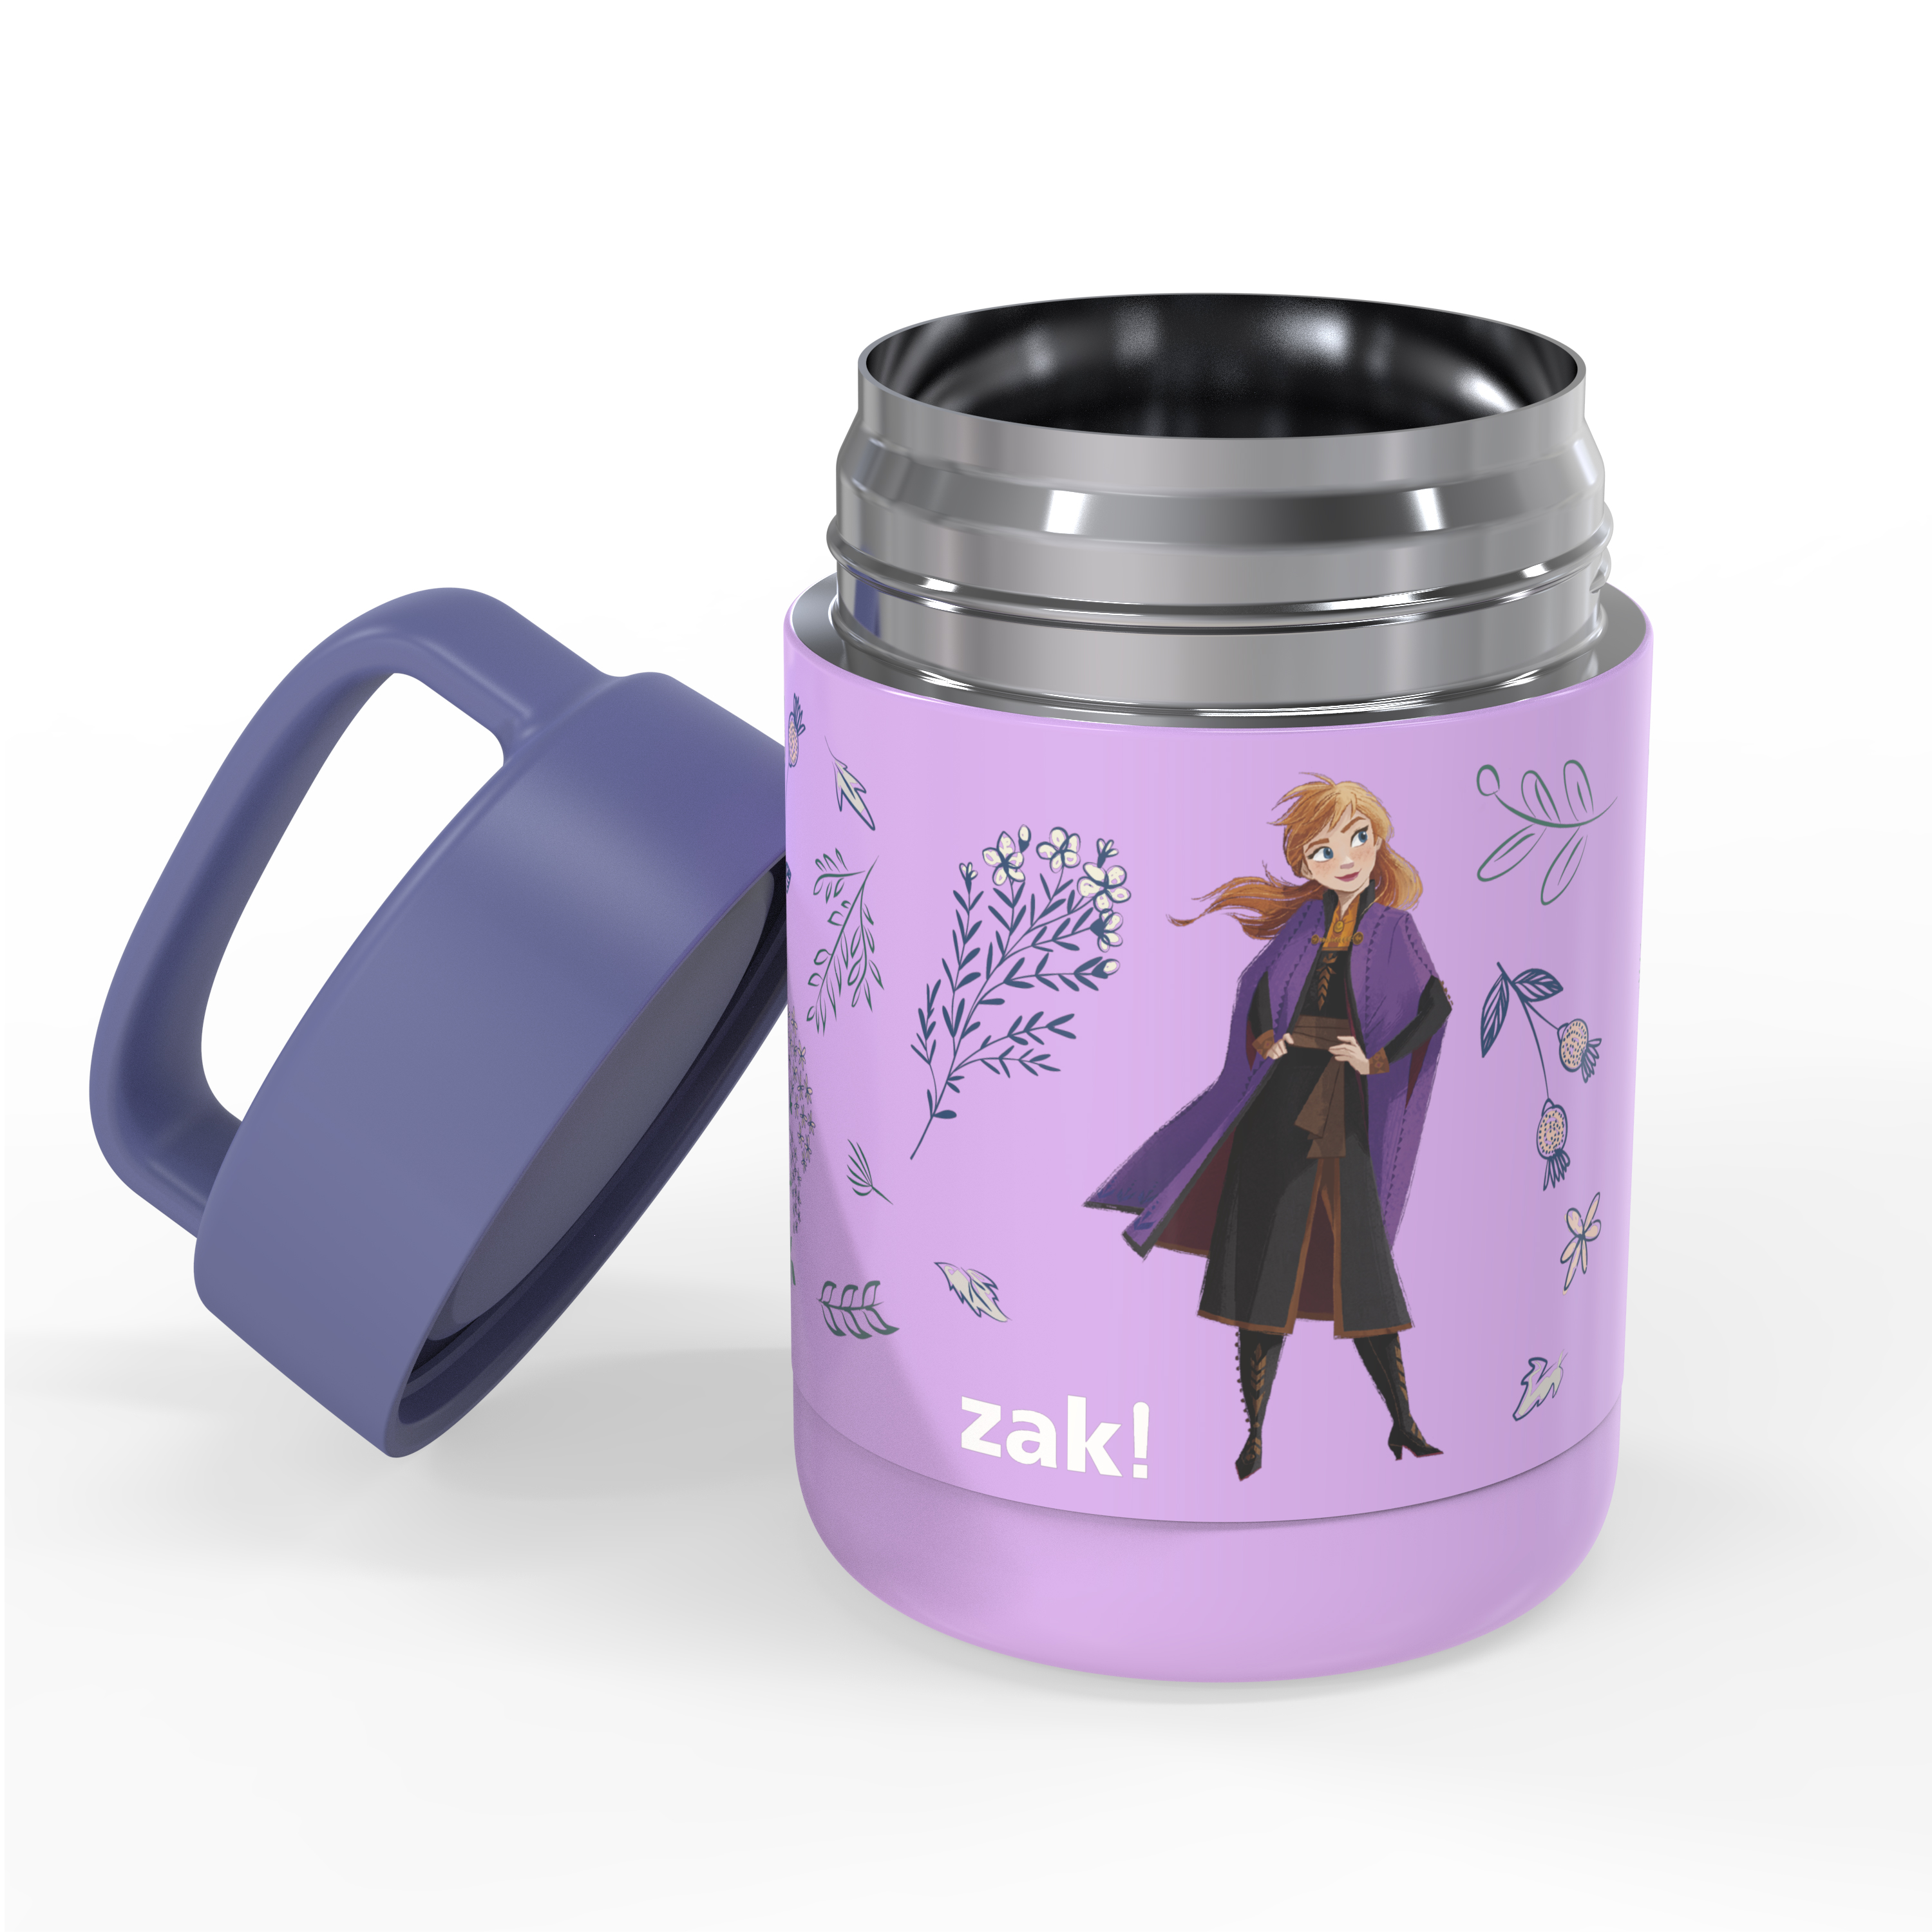 Disney Frozen 2 Movie Reusable Vacuum Insulated Stainless Steel Food Container, Princess Anna slideshow image 3